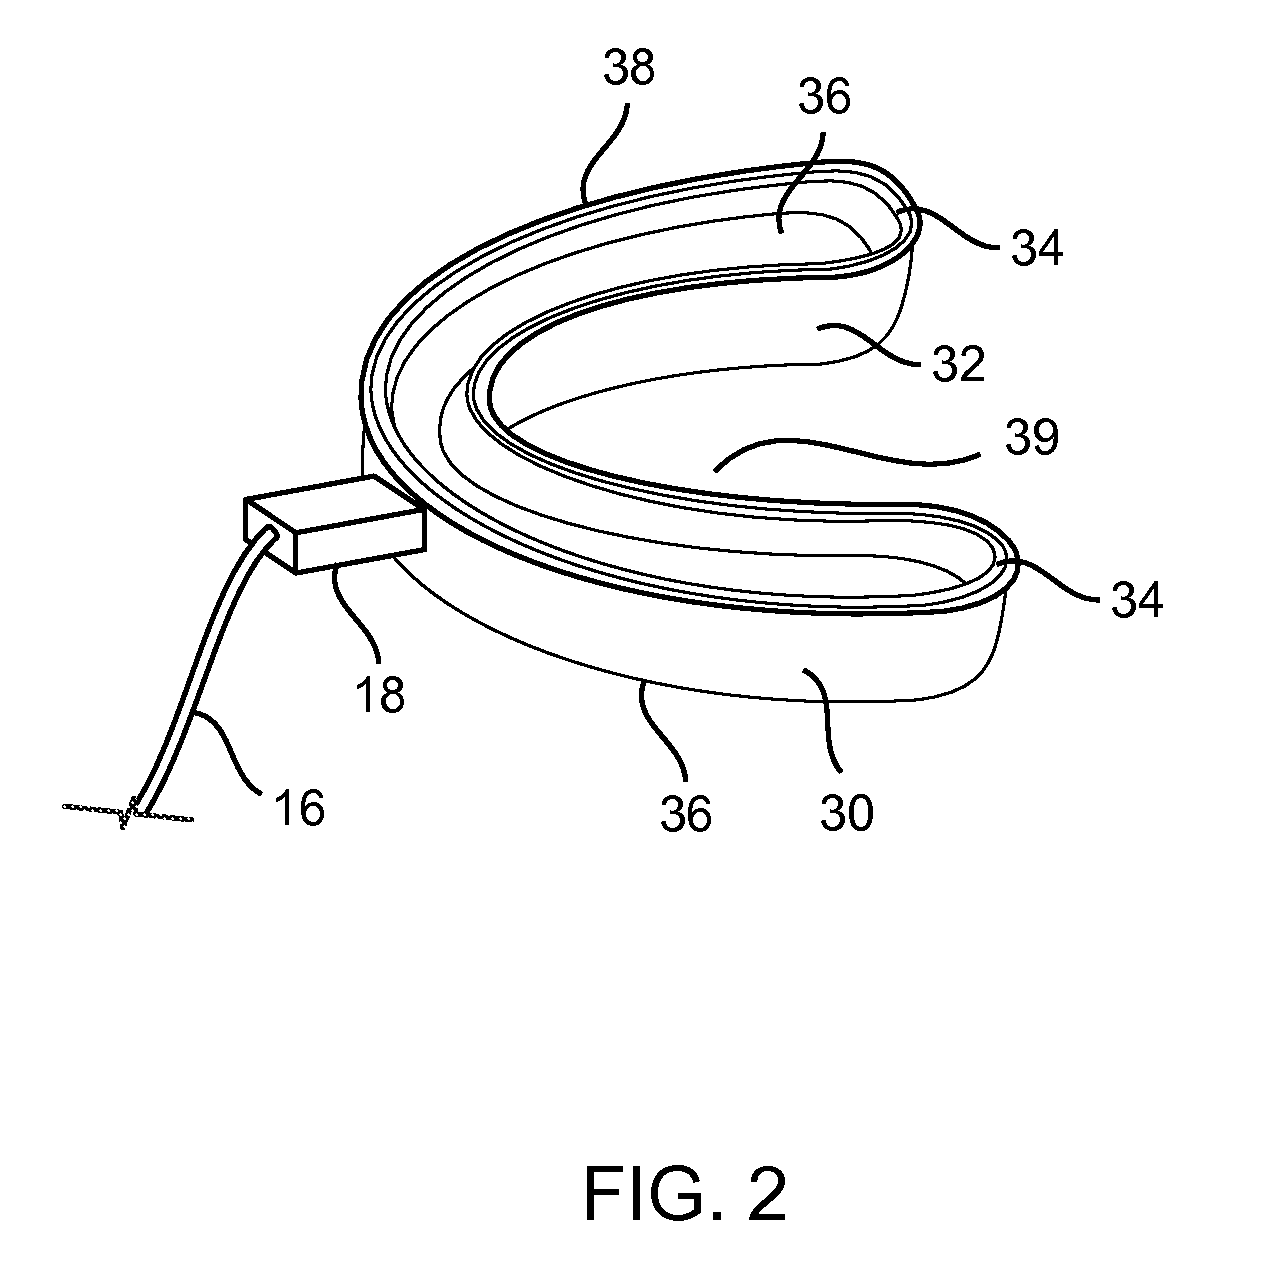 Full arch ultrasonic cleaner apparatus and method of use